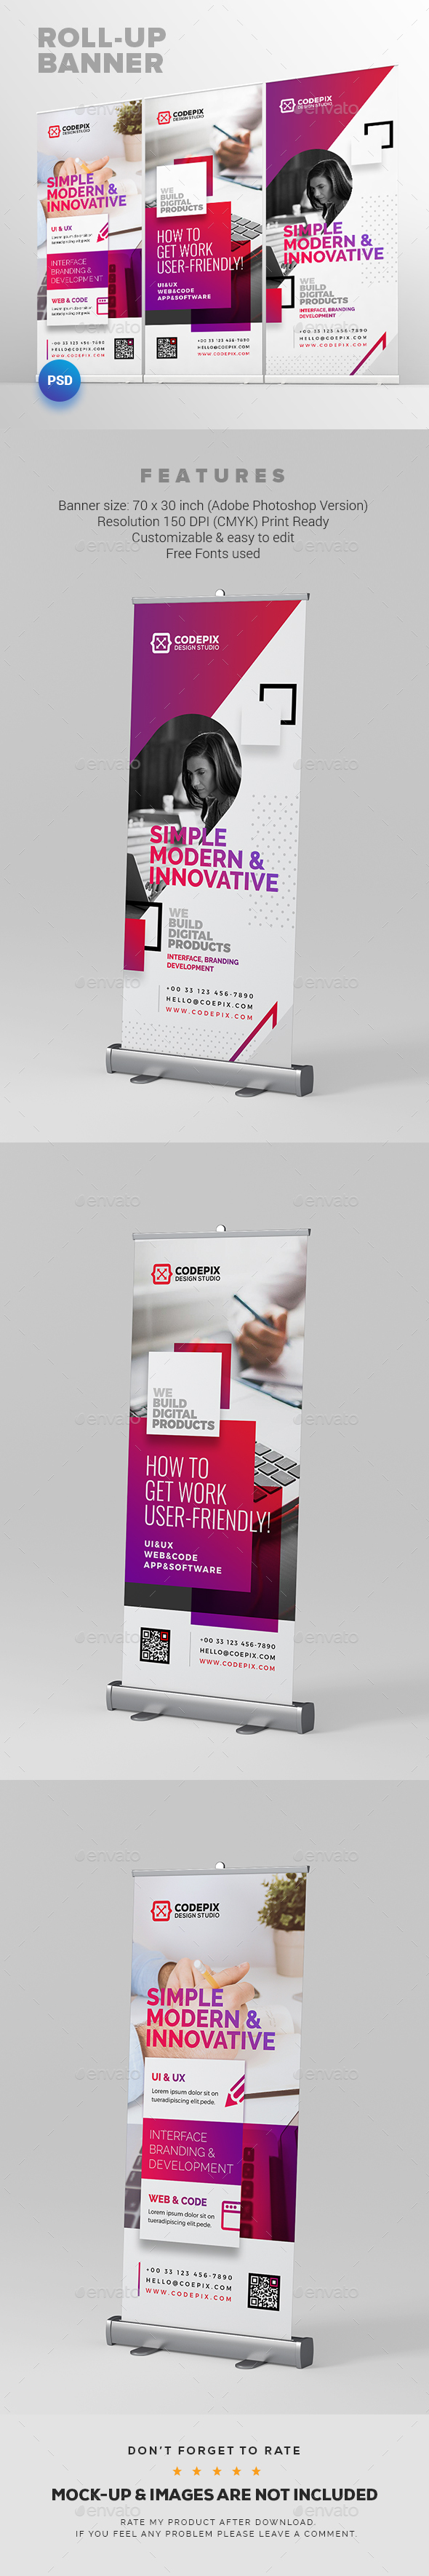 Roll-Up Banner in Signage Templates